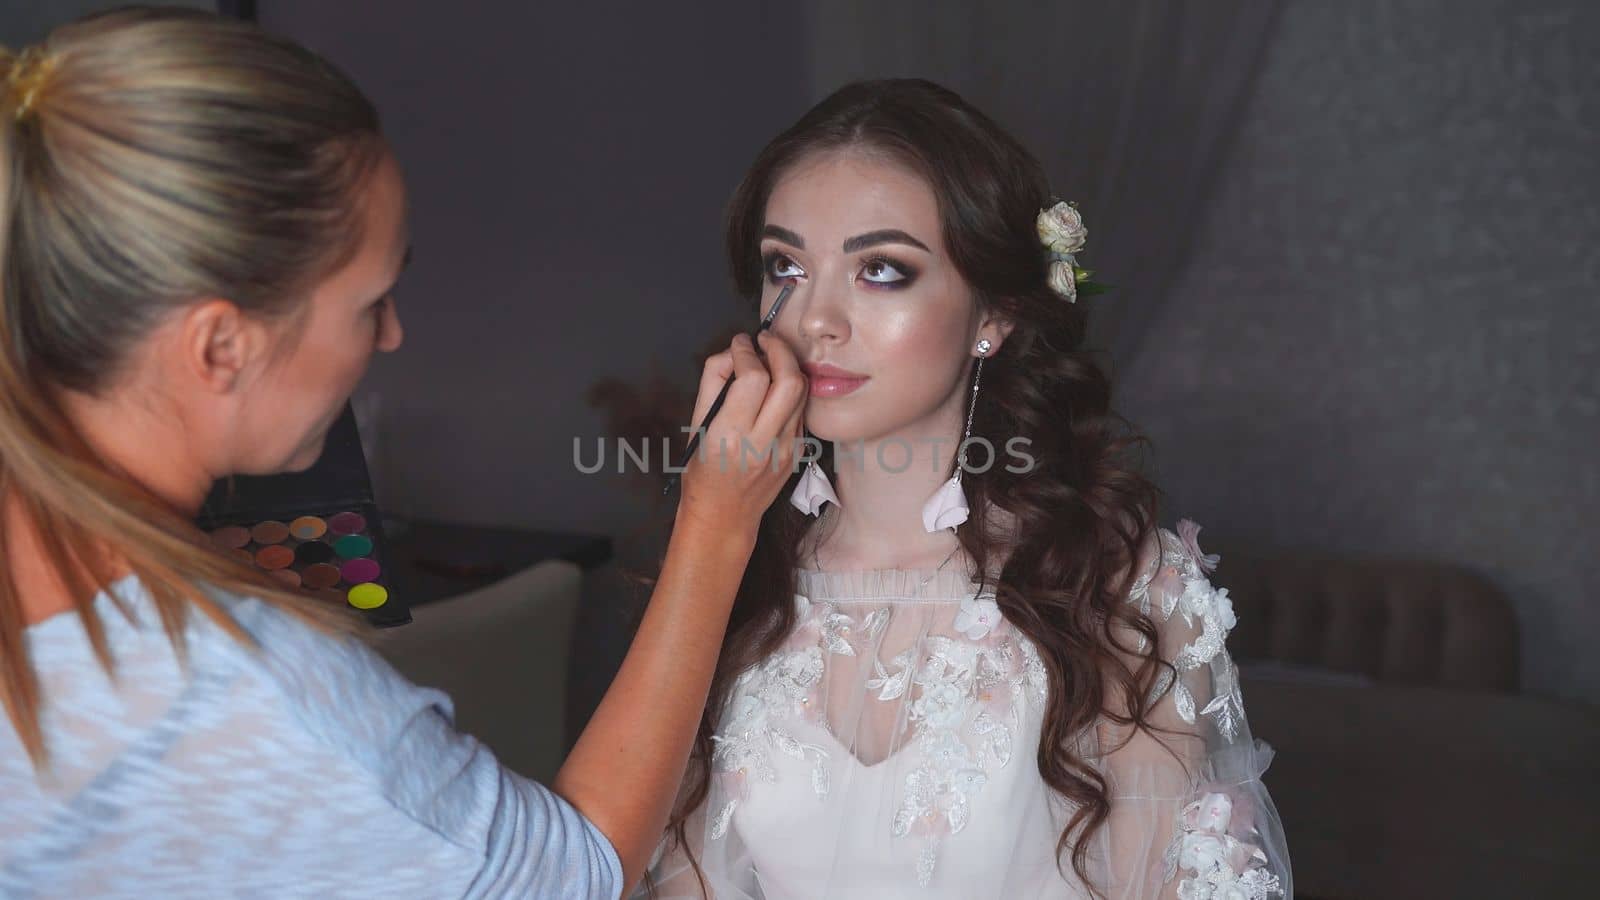 Makeup artist paints an eye for the bride on her wedding day. by DovidPro